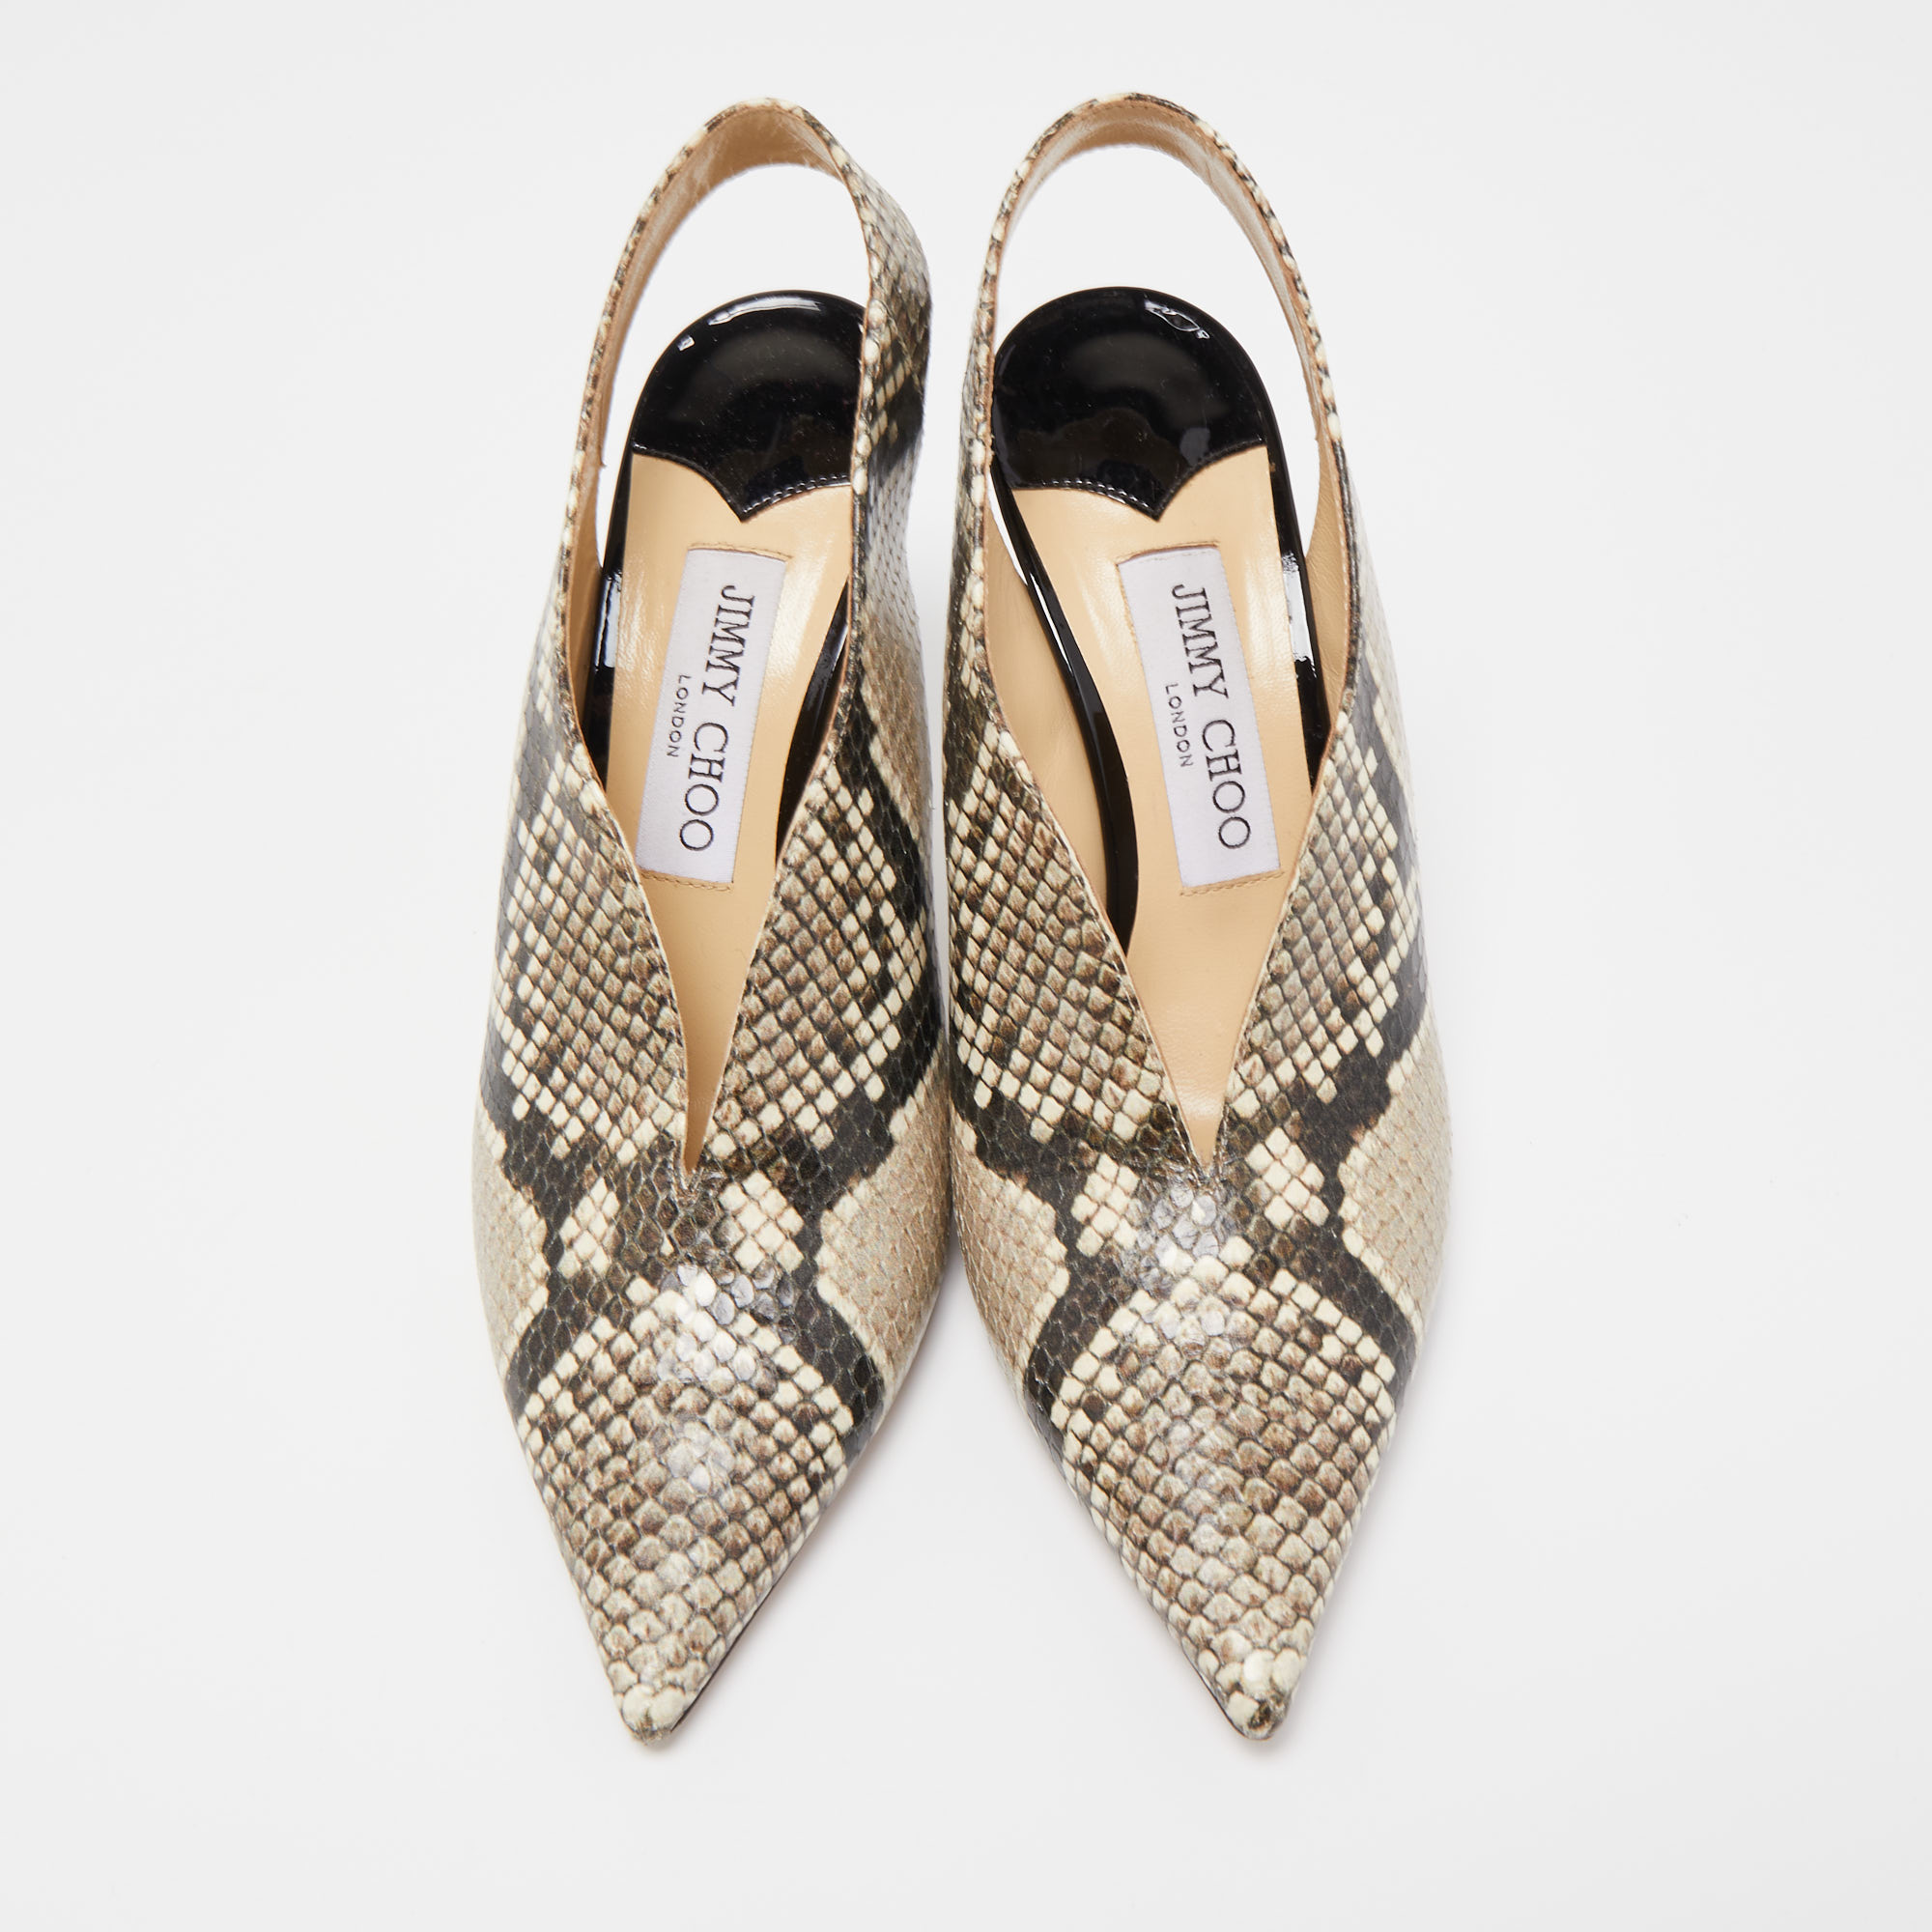 Jimmy Choo Brown/Beige Python Embossed Leather Pointed Toe Slingback Pumps Size 37